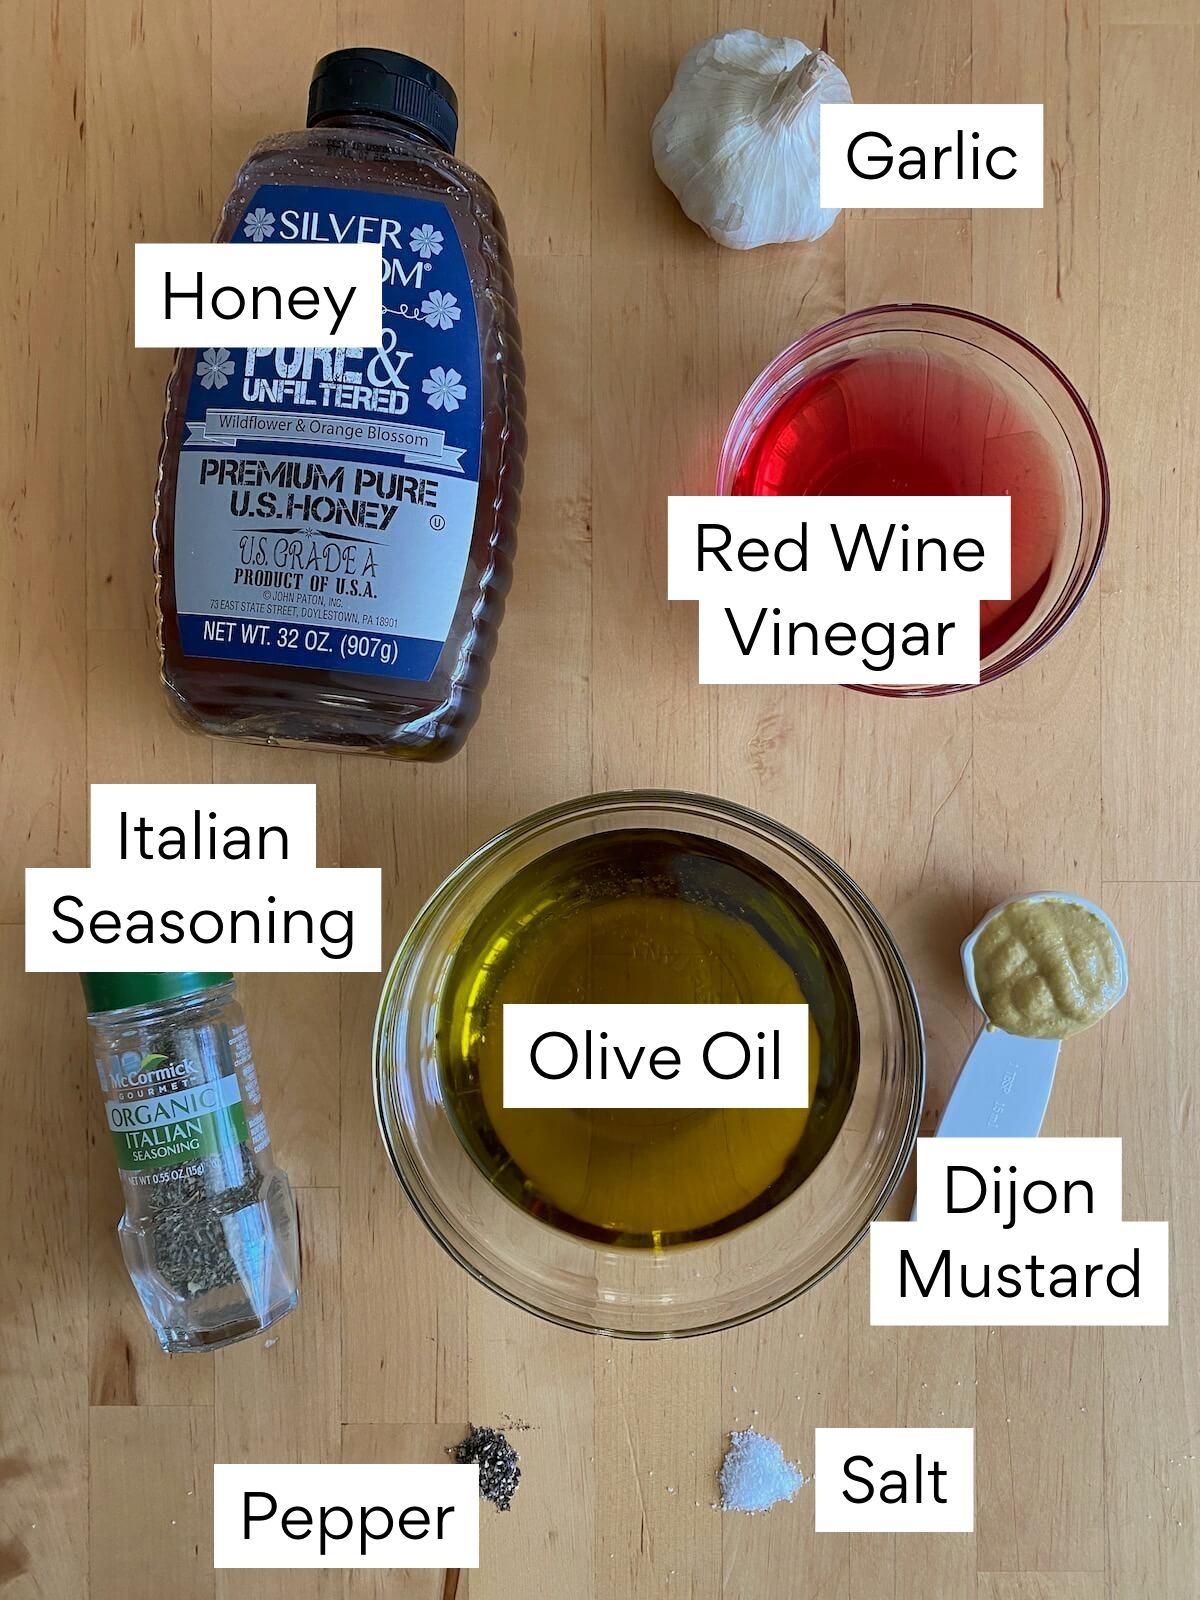 The ingredients to make red wine vinegar salad dressing. Each ingredient is labeled with text. They include honey, garlic, red wine vinegar, Italian seasoning, olive oil, dijon mustard, pepper, and salt.